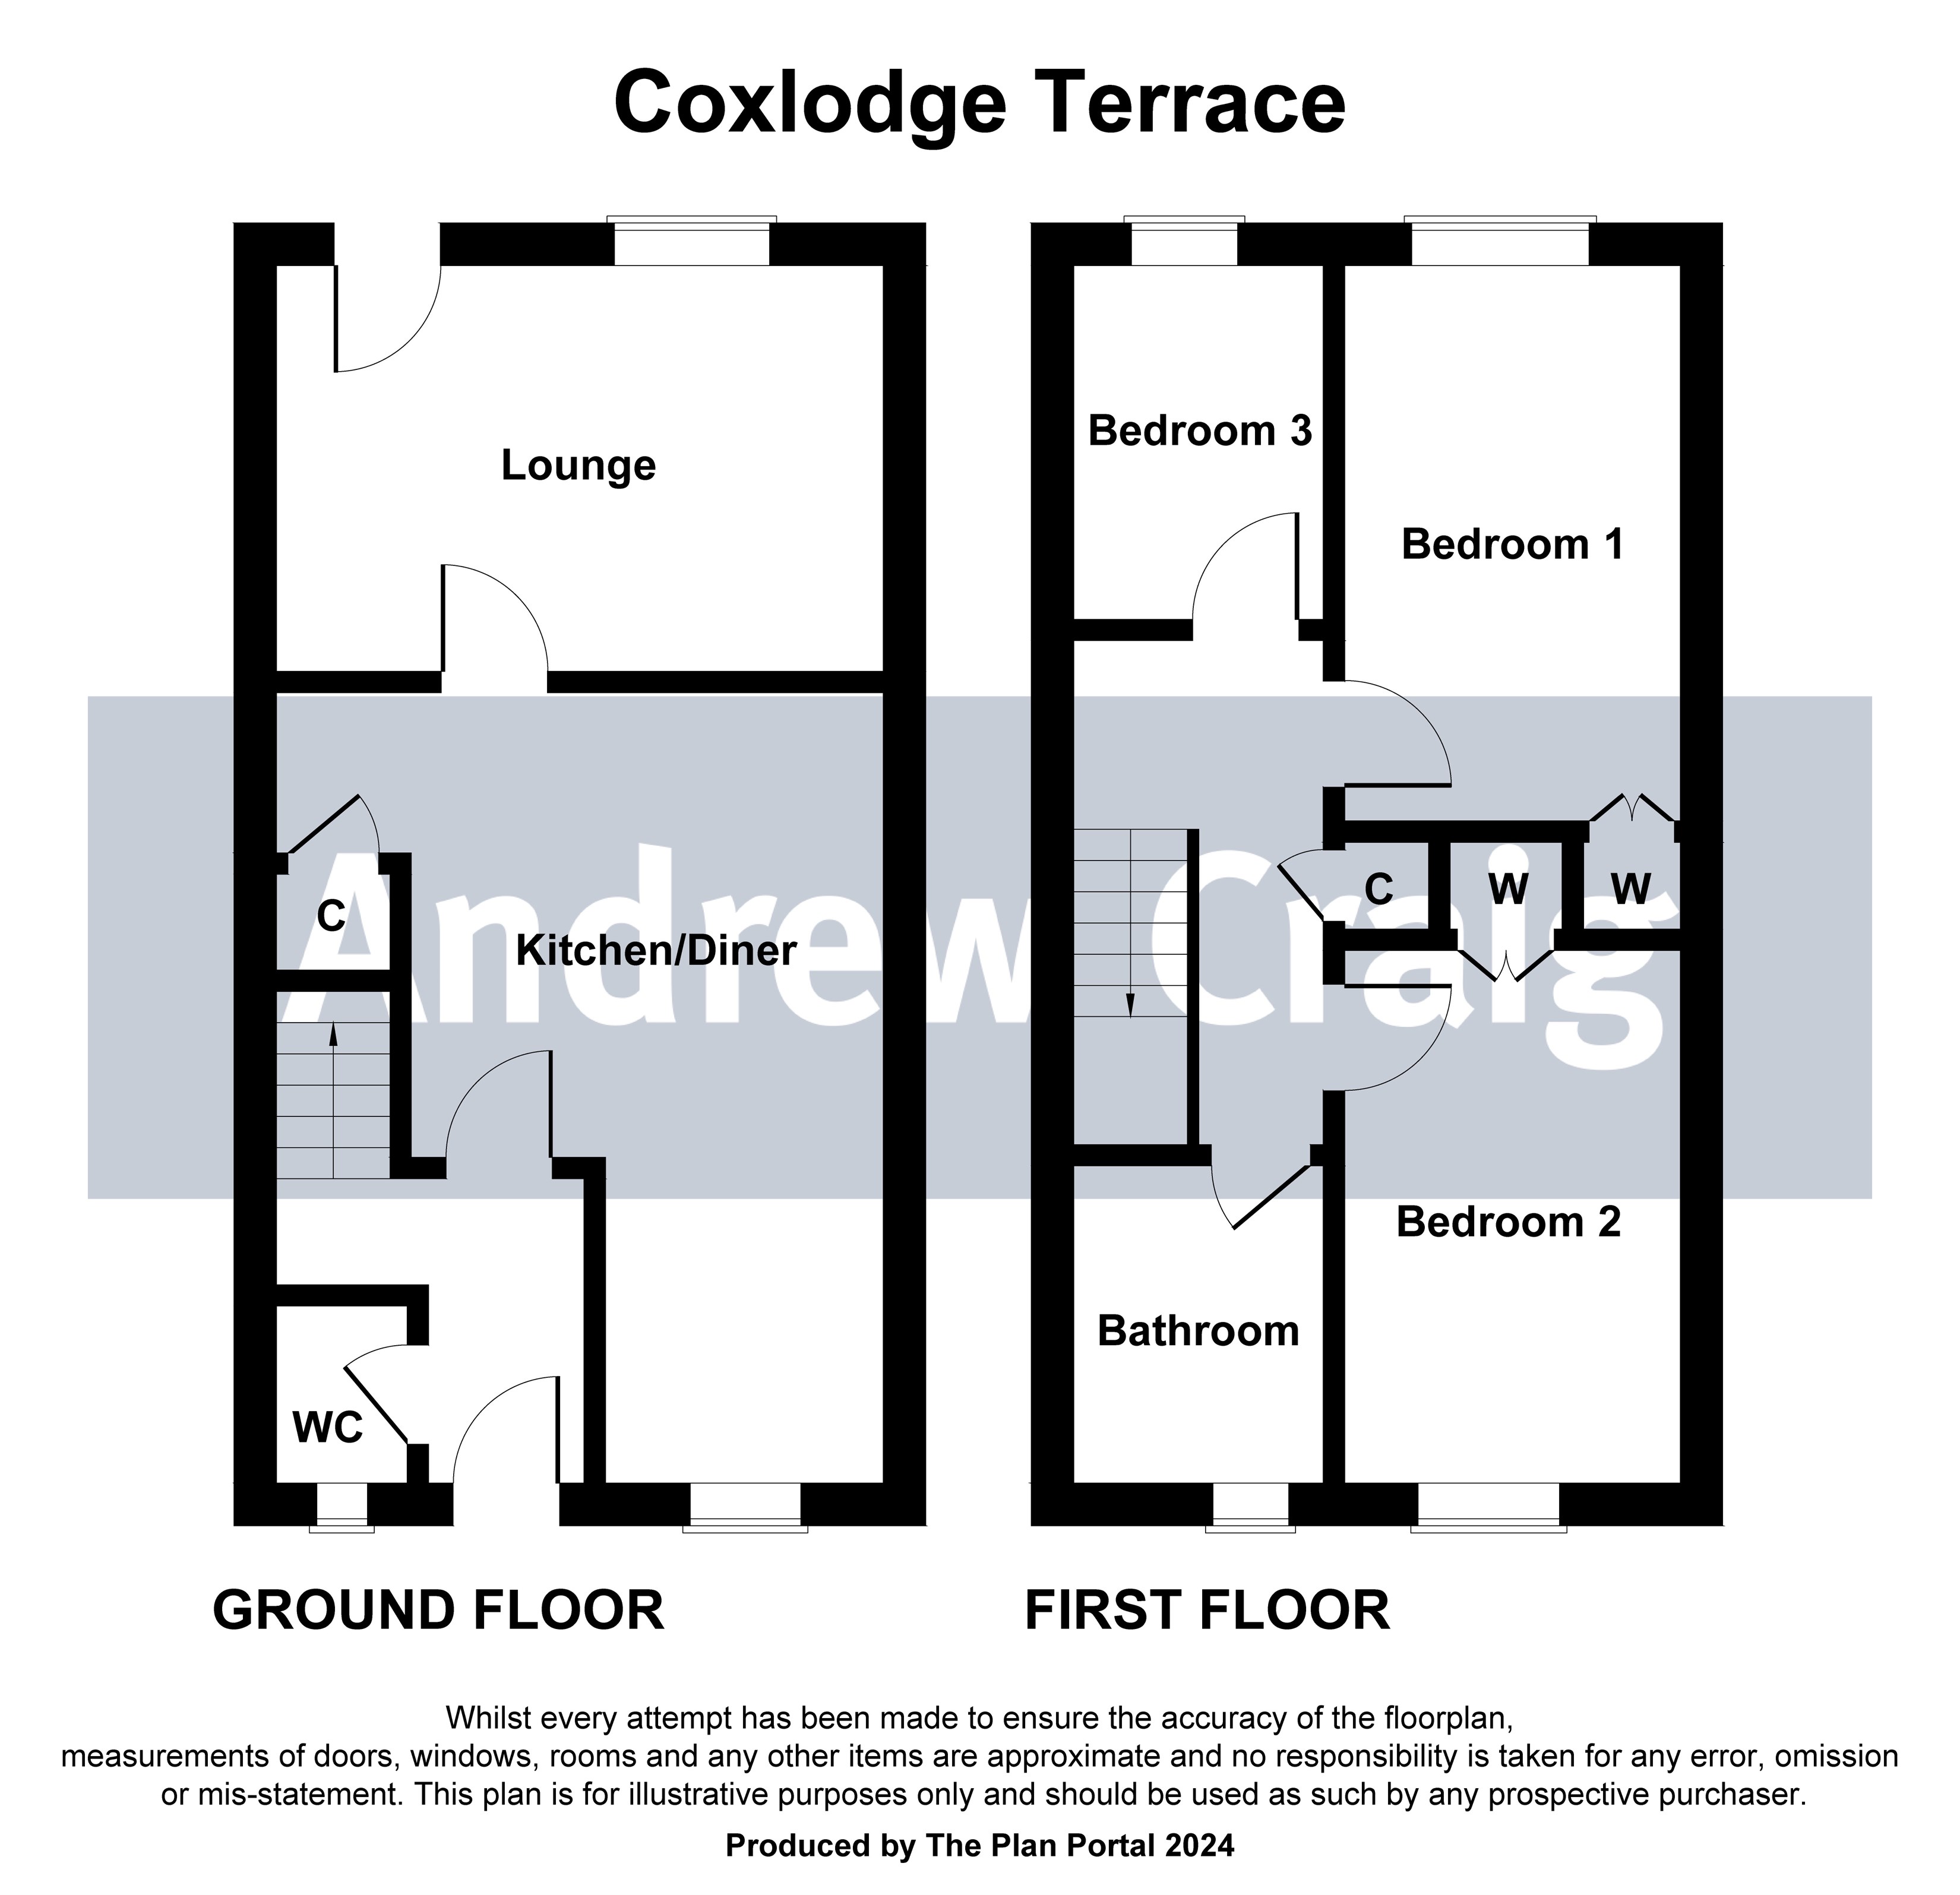 3 bed house for sale in Coxlodge Terrace, Gosforth - Property floorplan